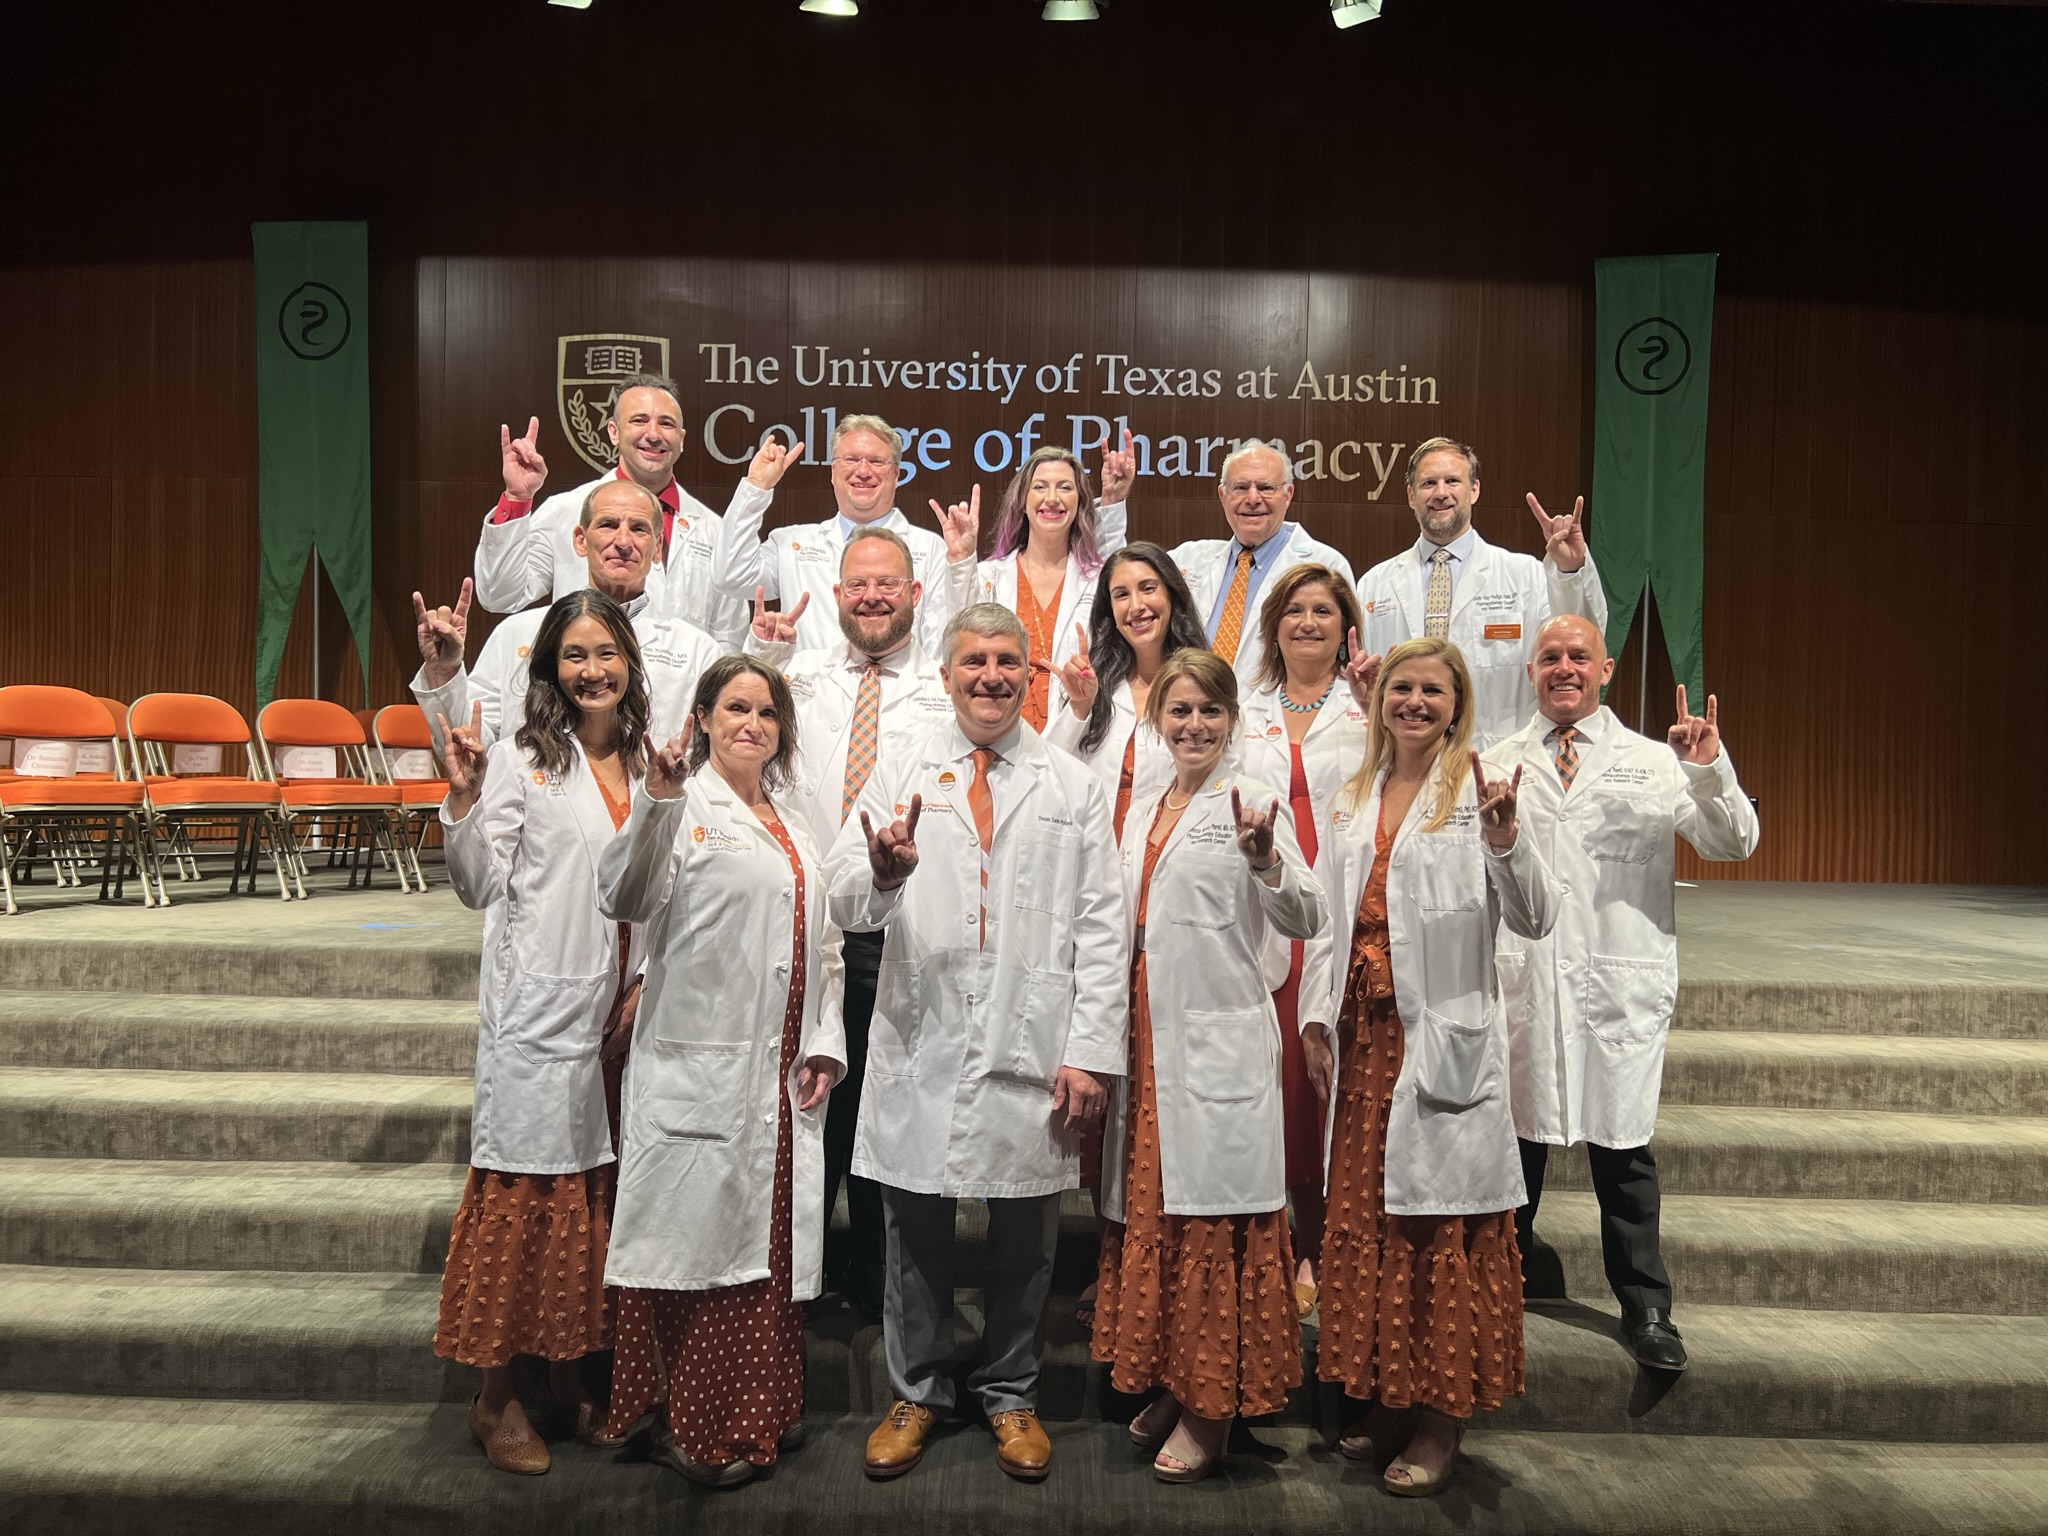 A group of people on some carpeted steps, wearing white coats and giving the Hook 'em Horns hand gesture.